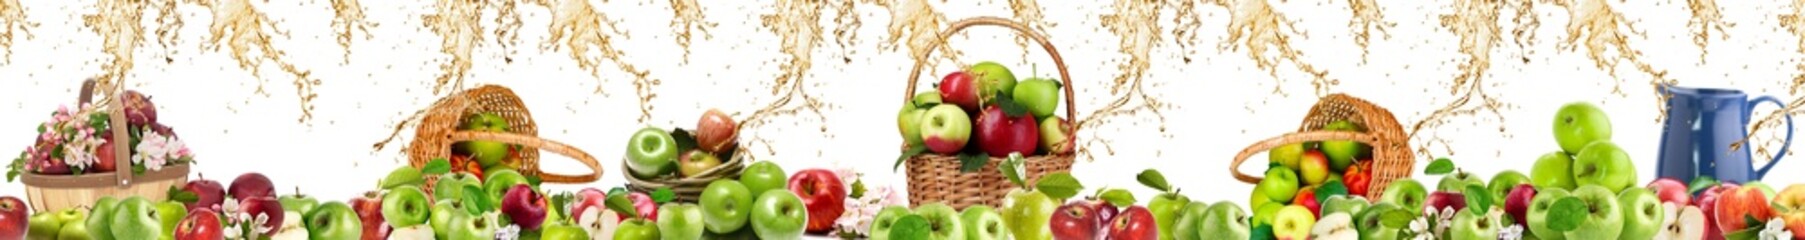 Apples red and green with basket on white background